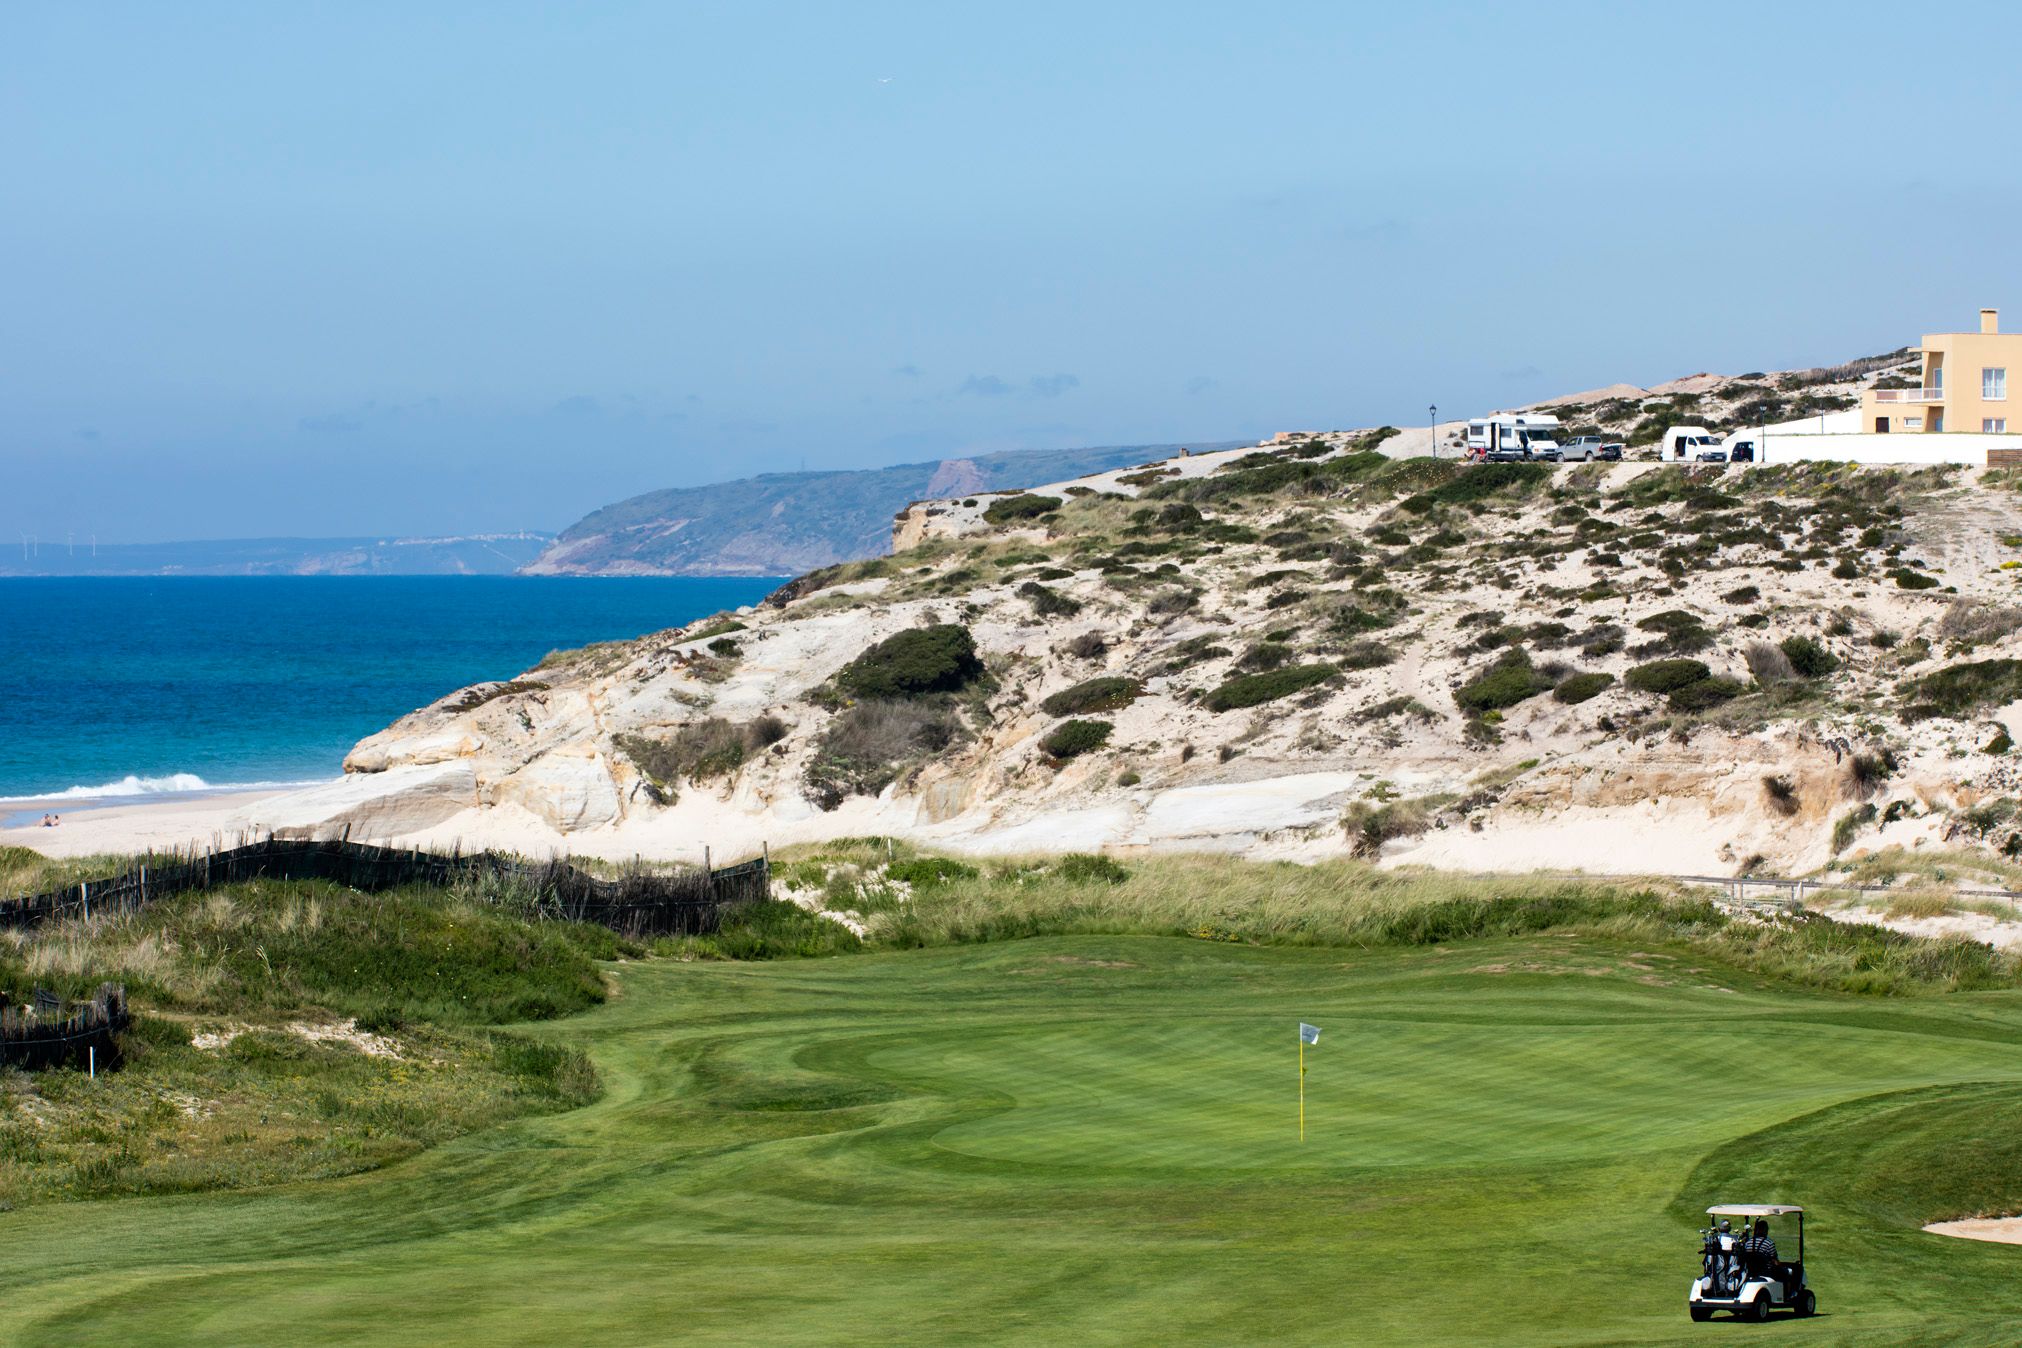 Praia D'El Rey Golf Course with golfer in a buggy approaching the green